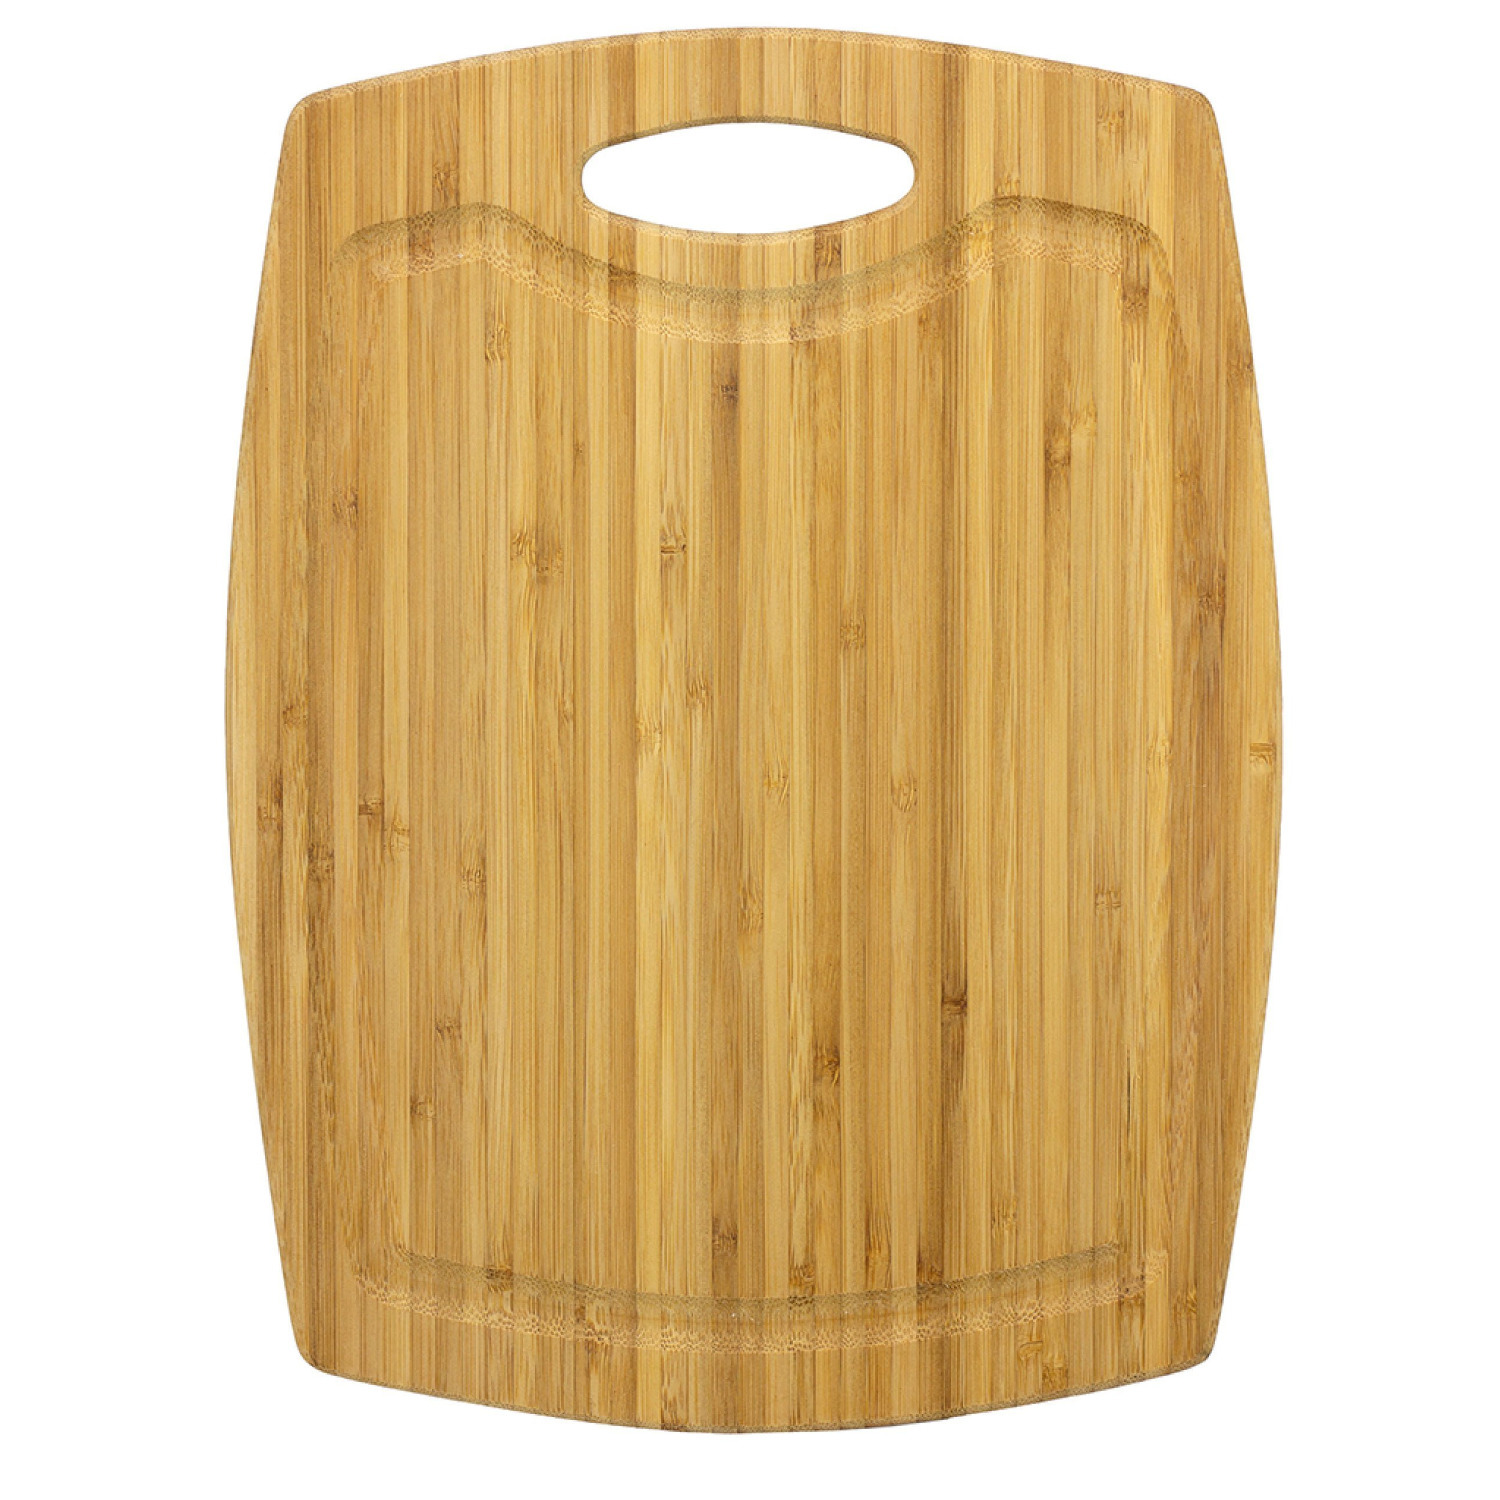 Totally Bamboo 12" Greenlite Dishwasher Safe Cutting Board - image 1 of 5